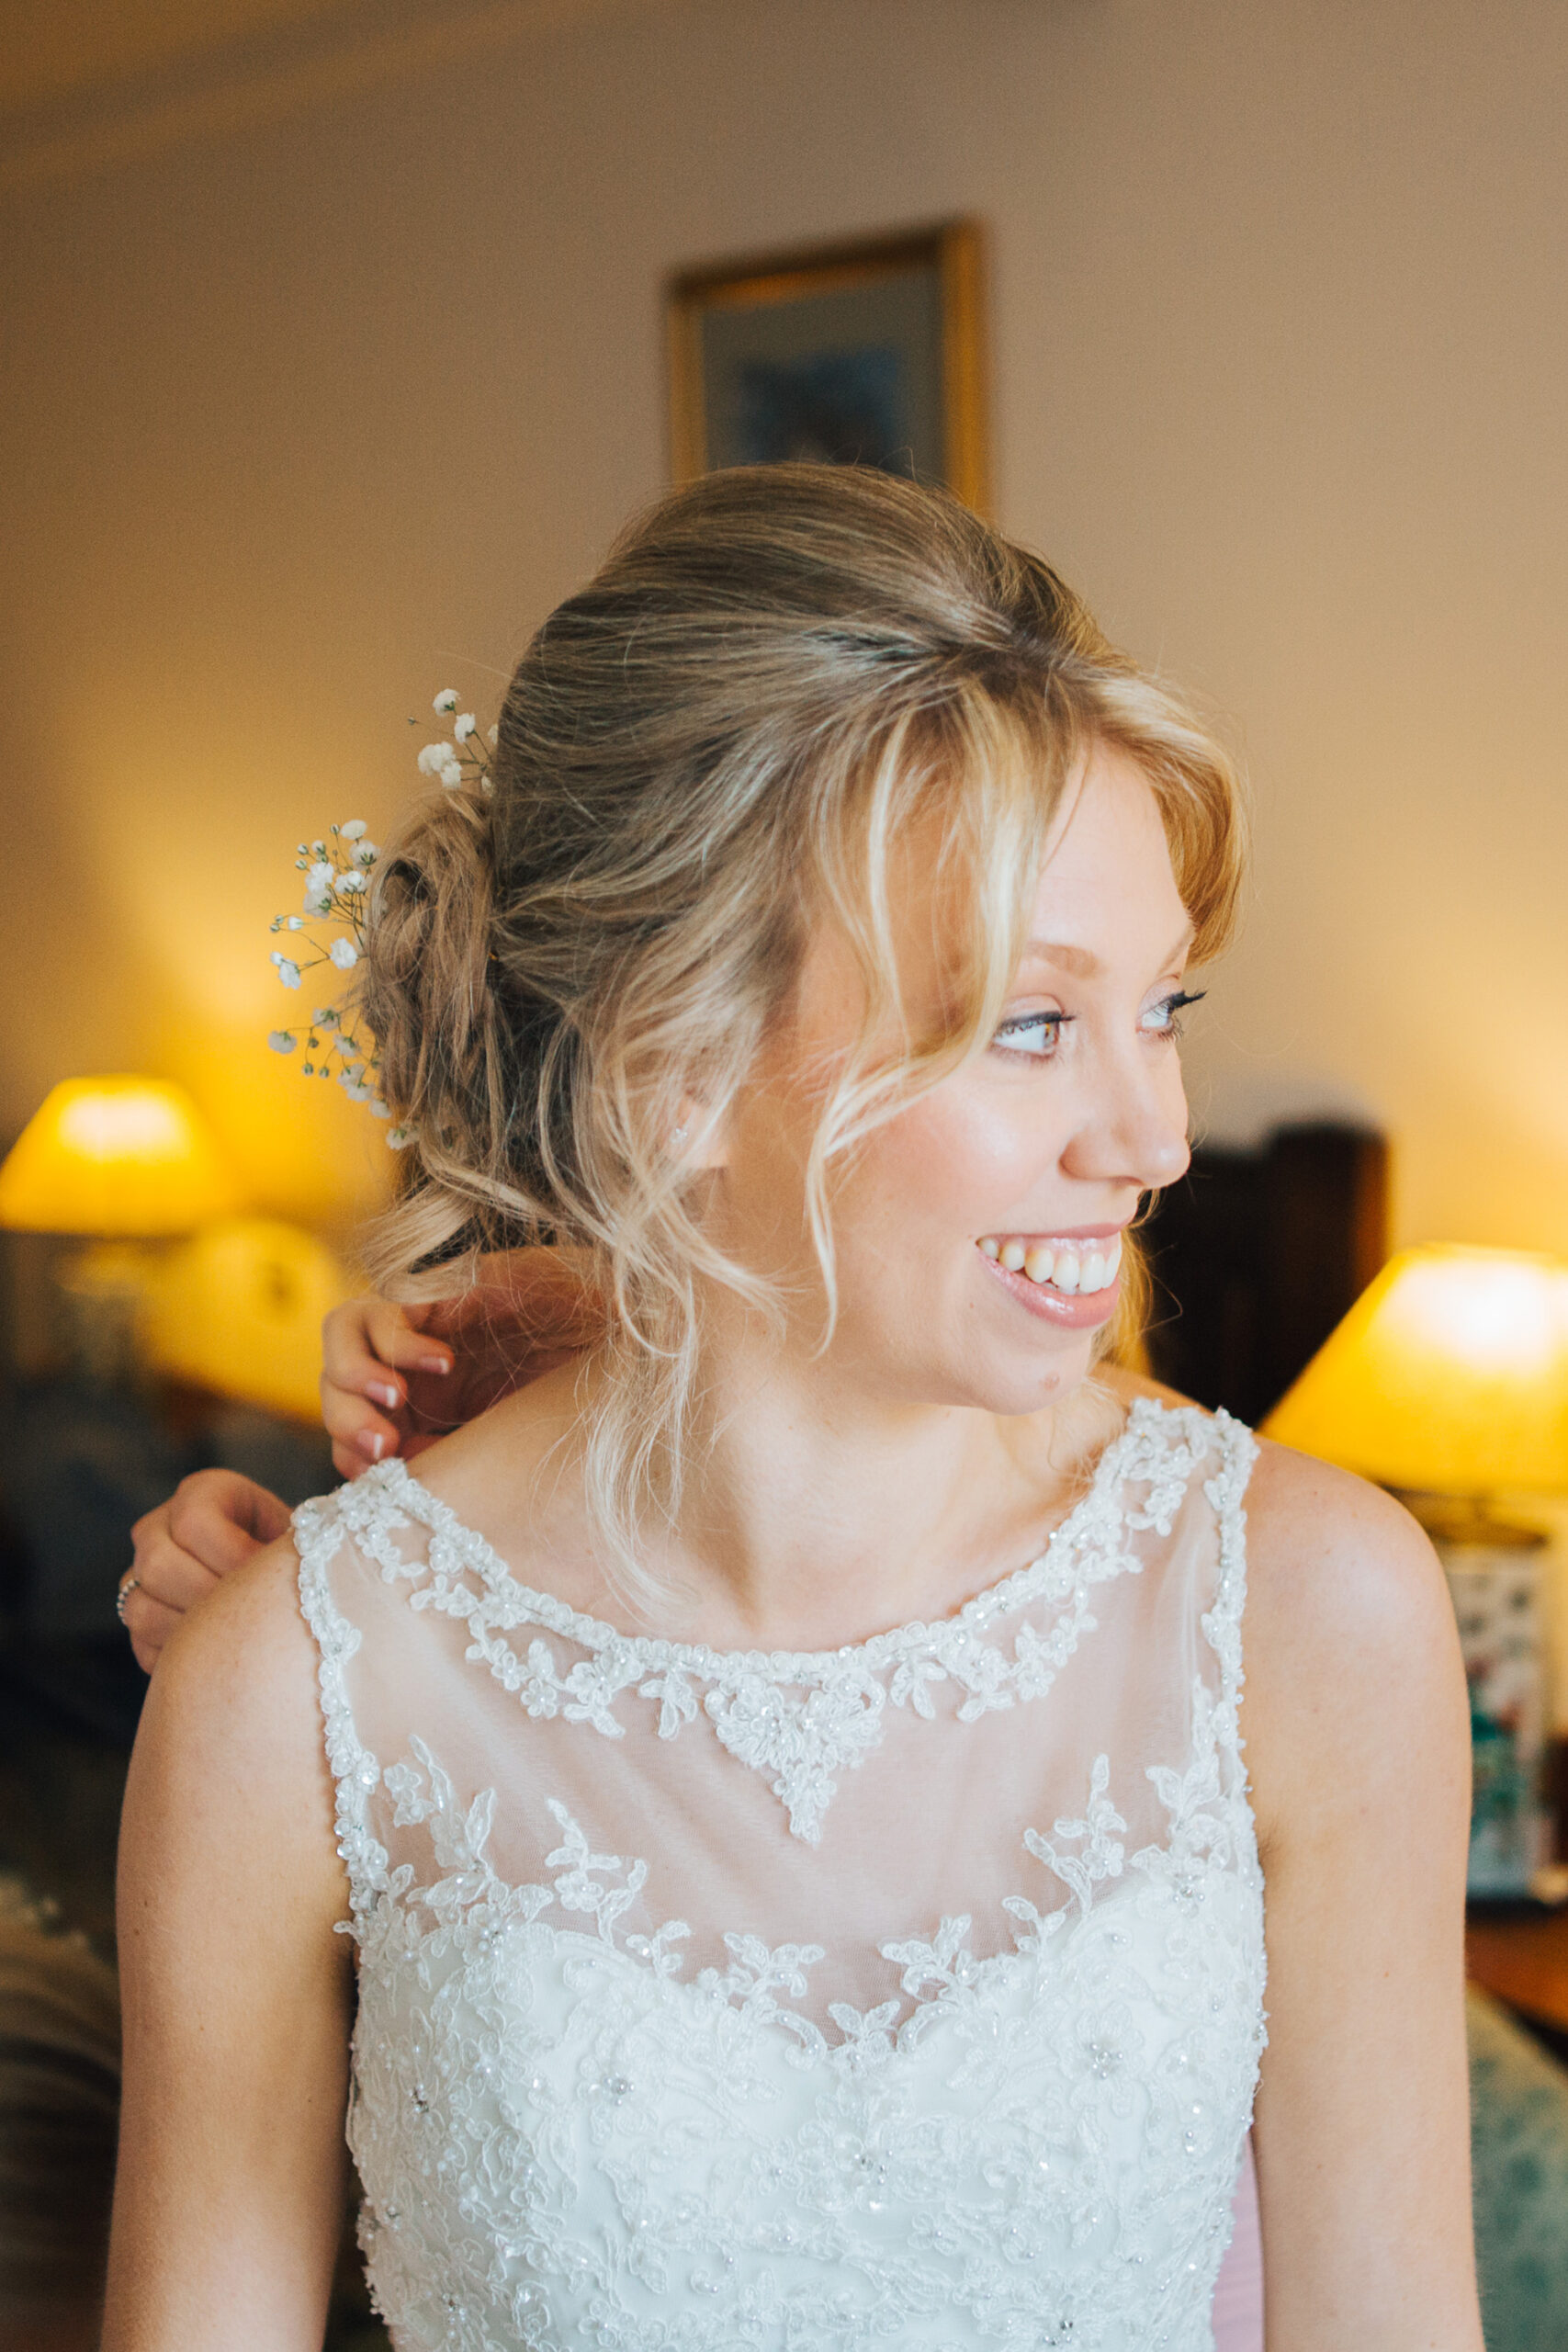 Lucy Lee Country Wedding Loveseen Photography SBS 008 scaled